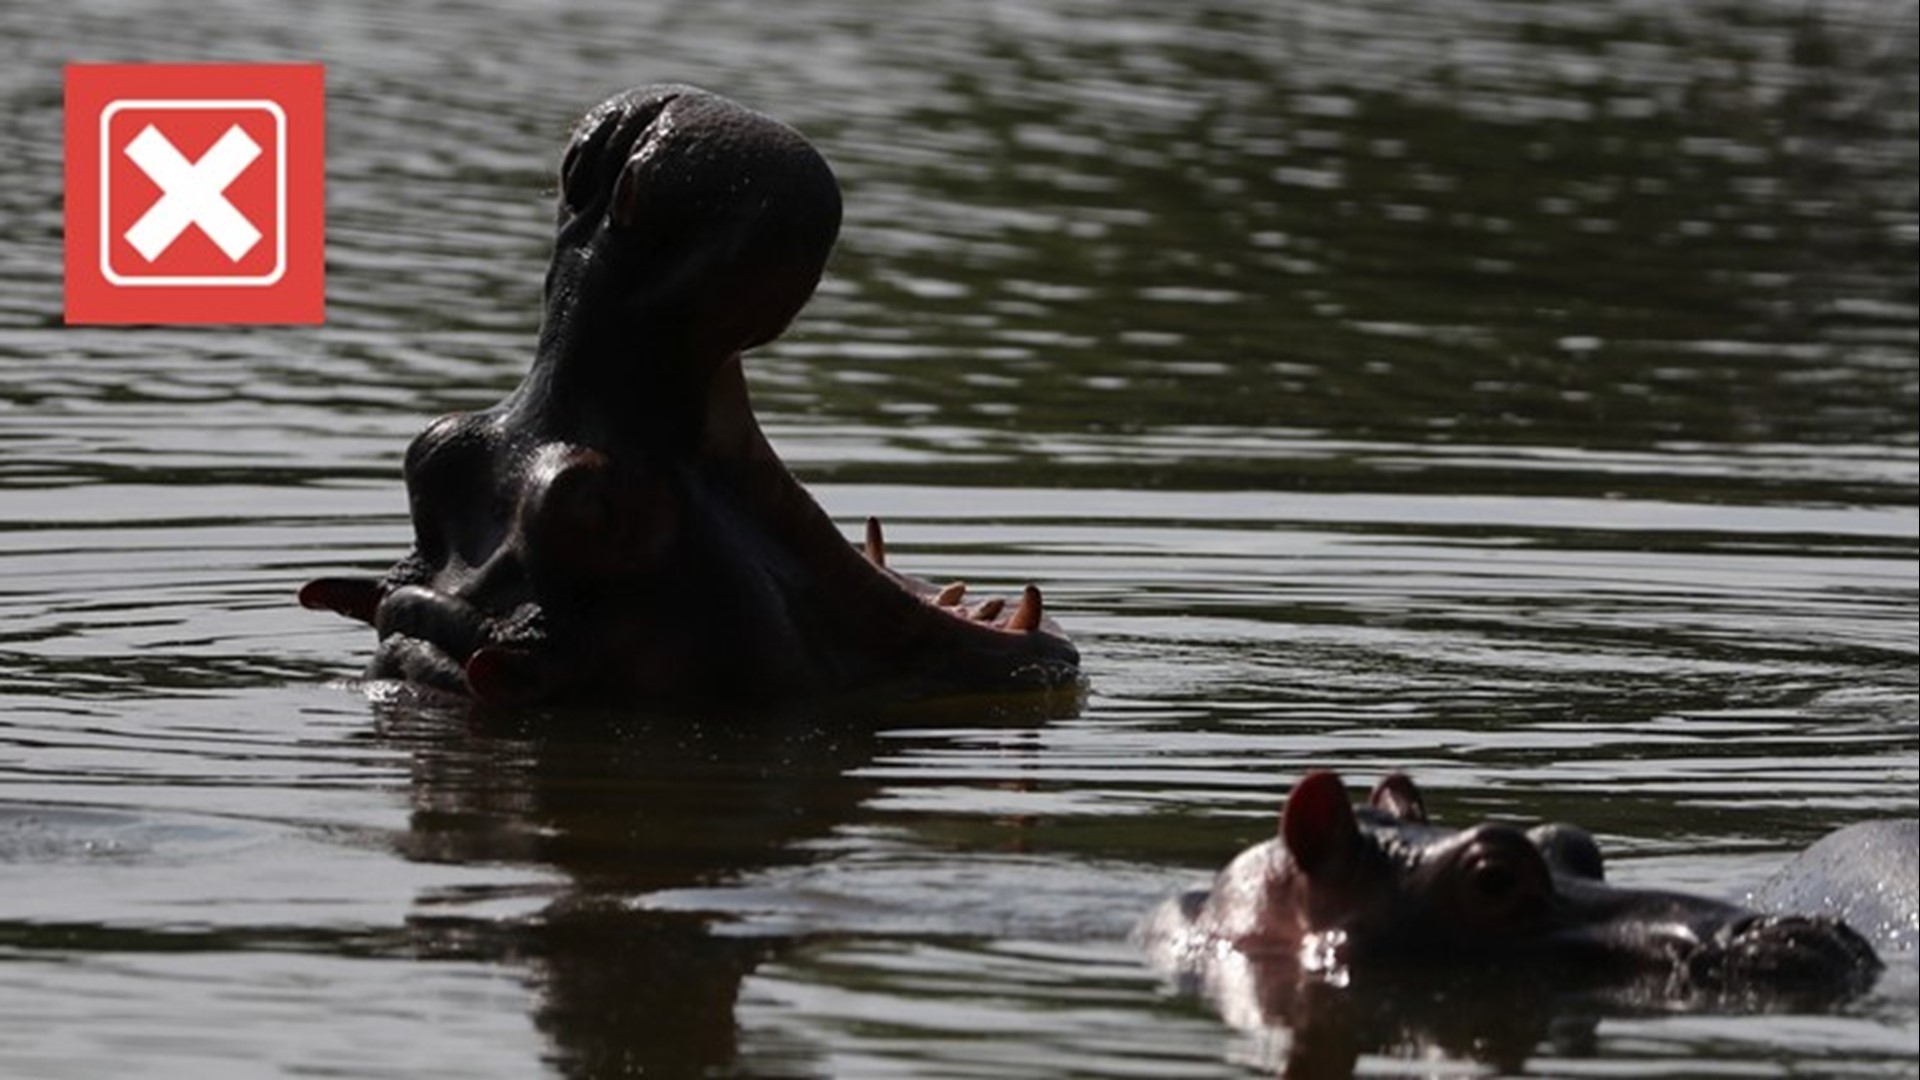 There isn’t an exact count of how many people are killed by hippos each year, but all estimates place hippo deaths far below those caused by mosquitoes and snakes.